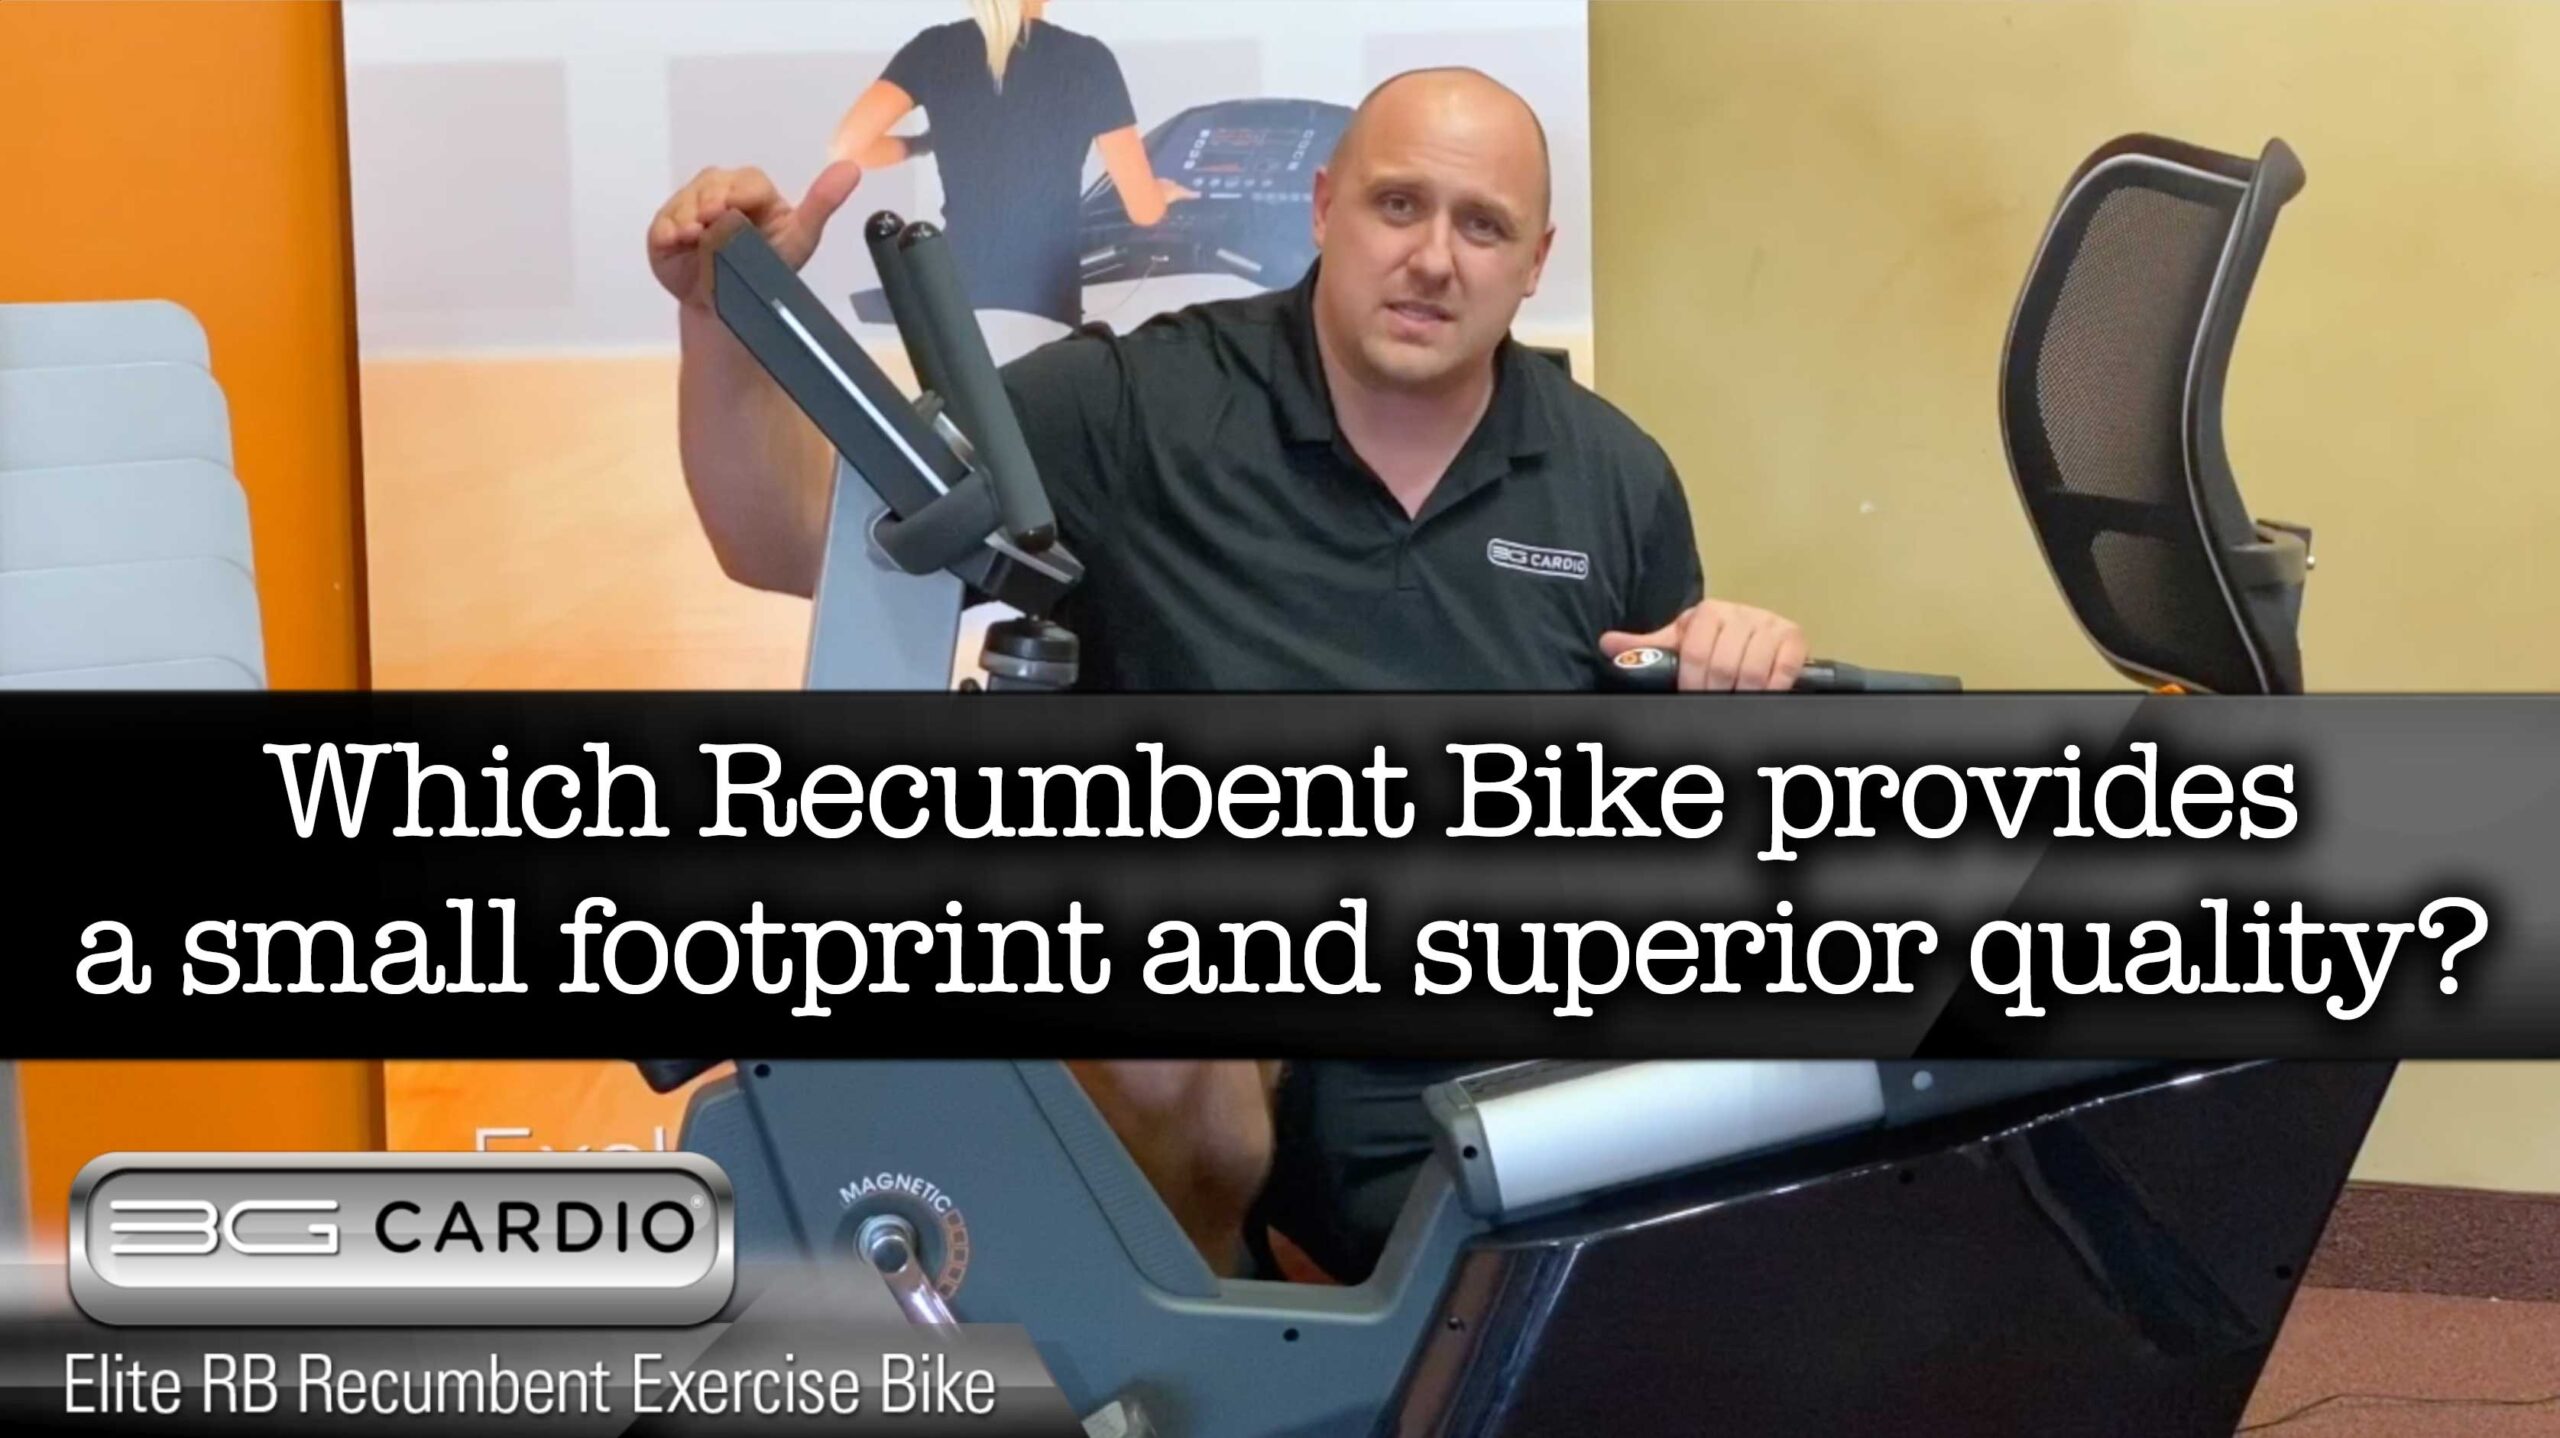 What makes the Compact Elite Recumbent Bike so space friendly?